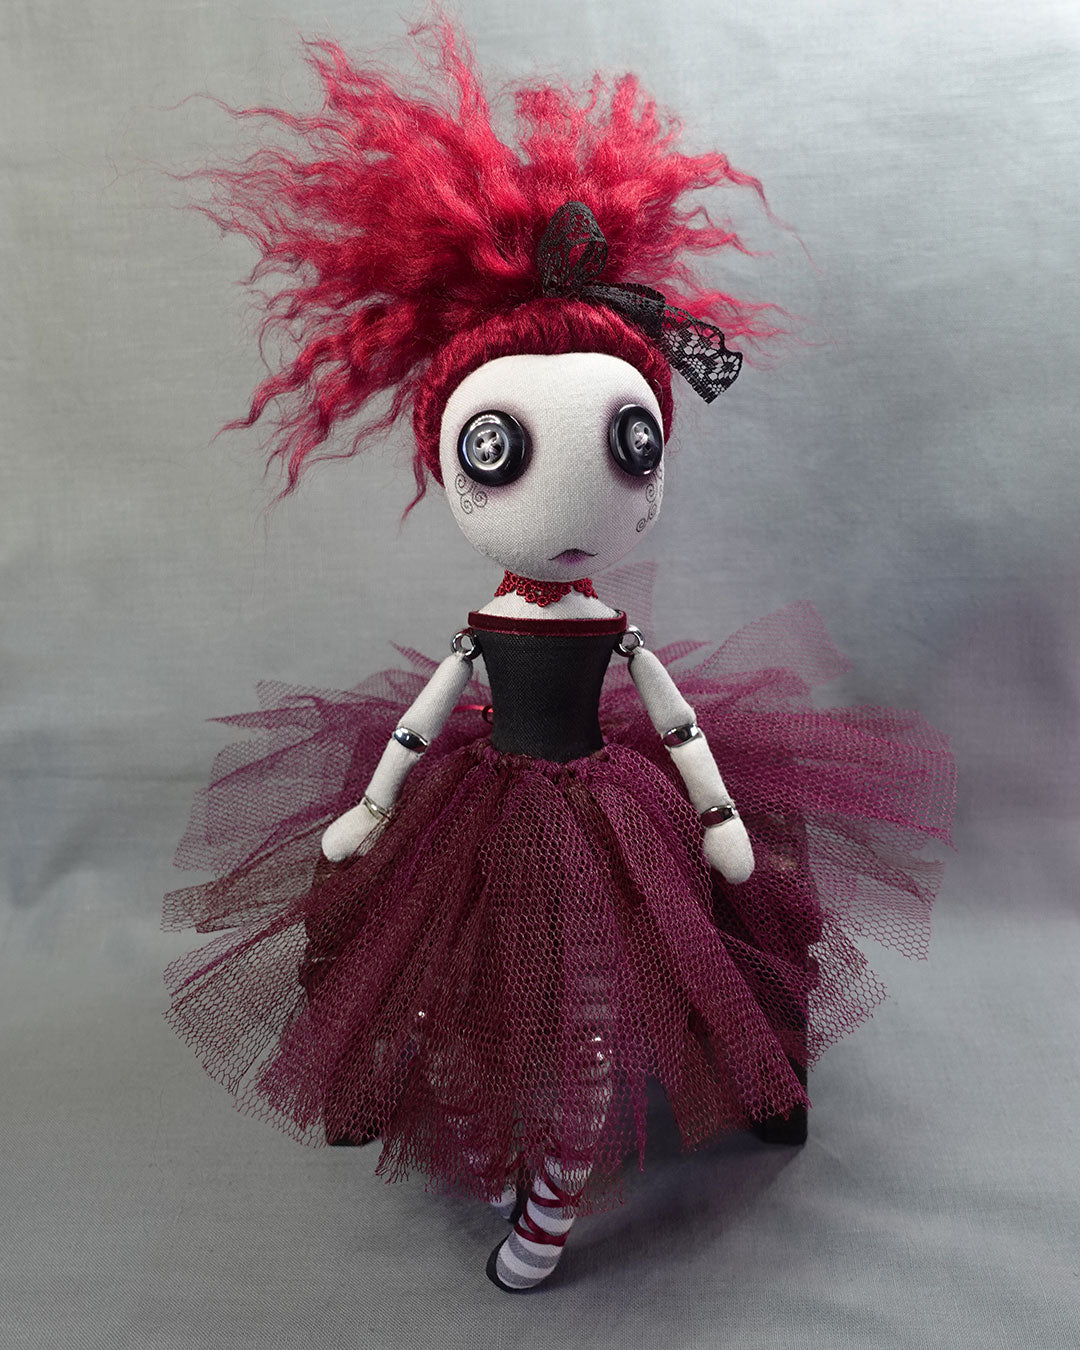 a button eyed Gothic ballerina art doll in burgundy and black